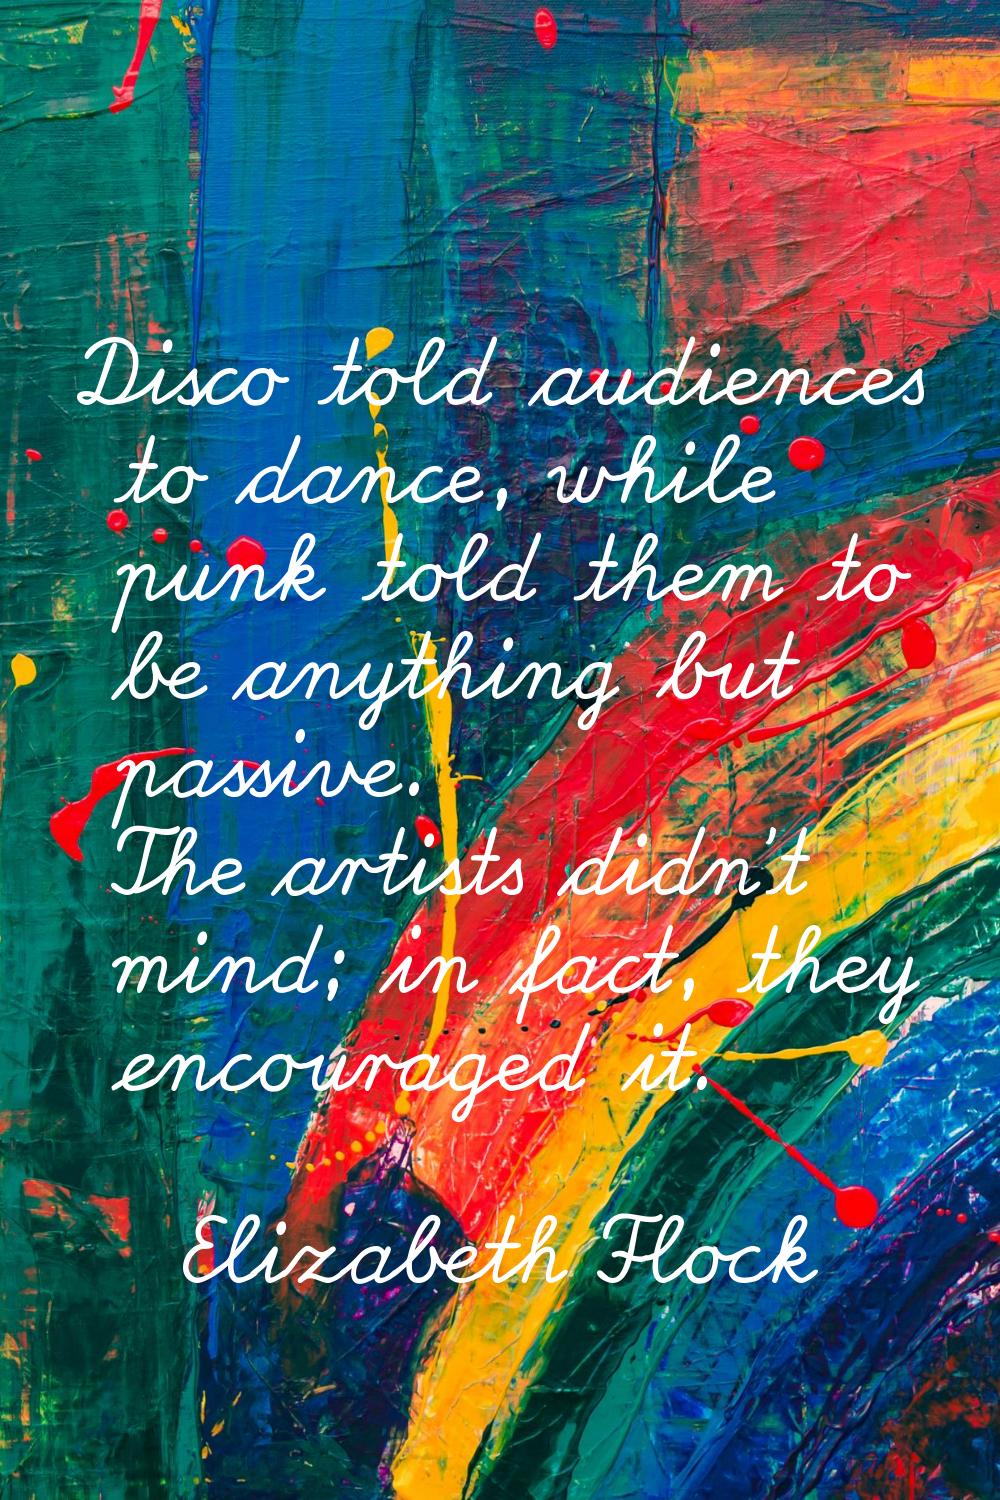 Disco told audiences to dance, while punk told them to be anything but passive. The artists didn't 